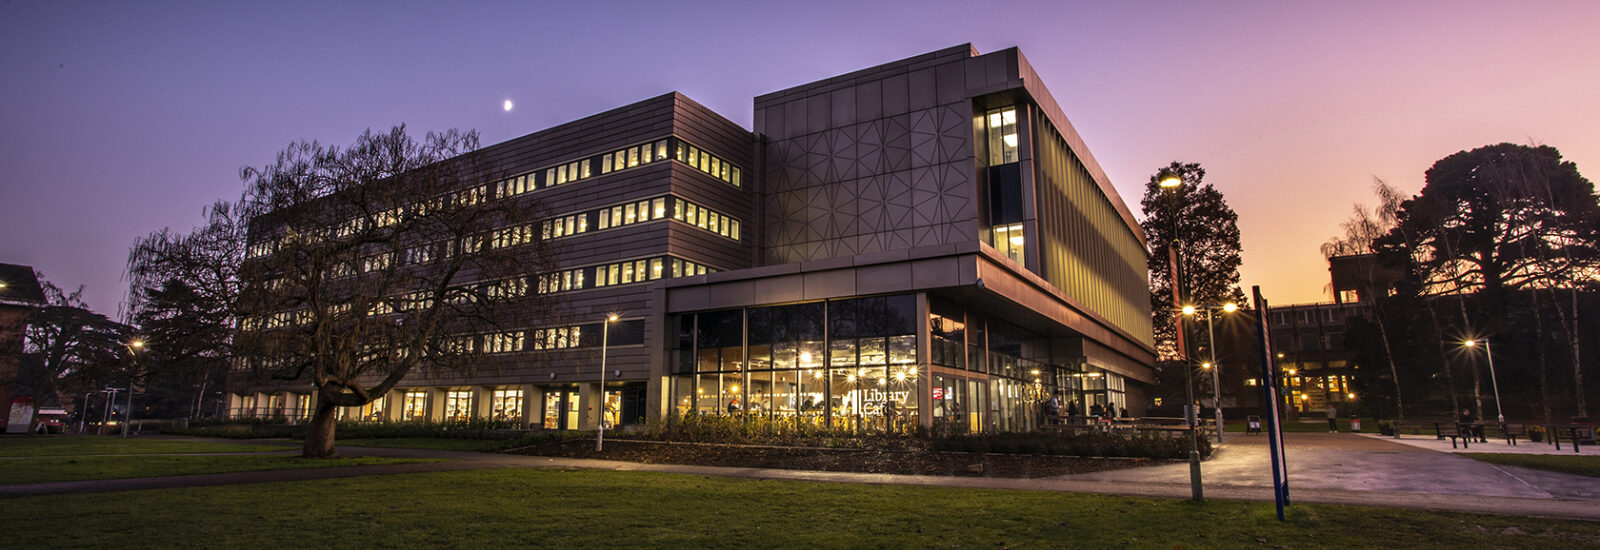 University of Reading Library at sunset